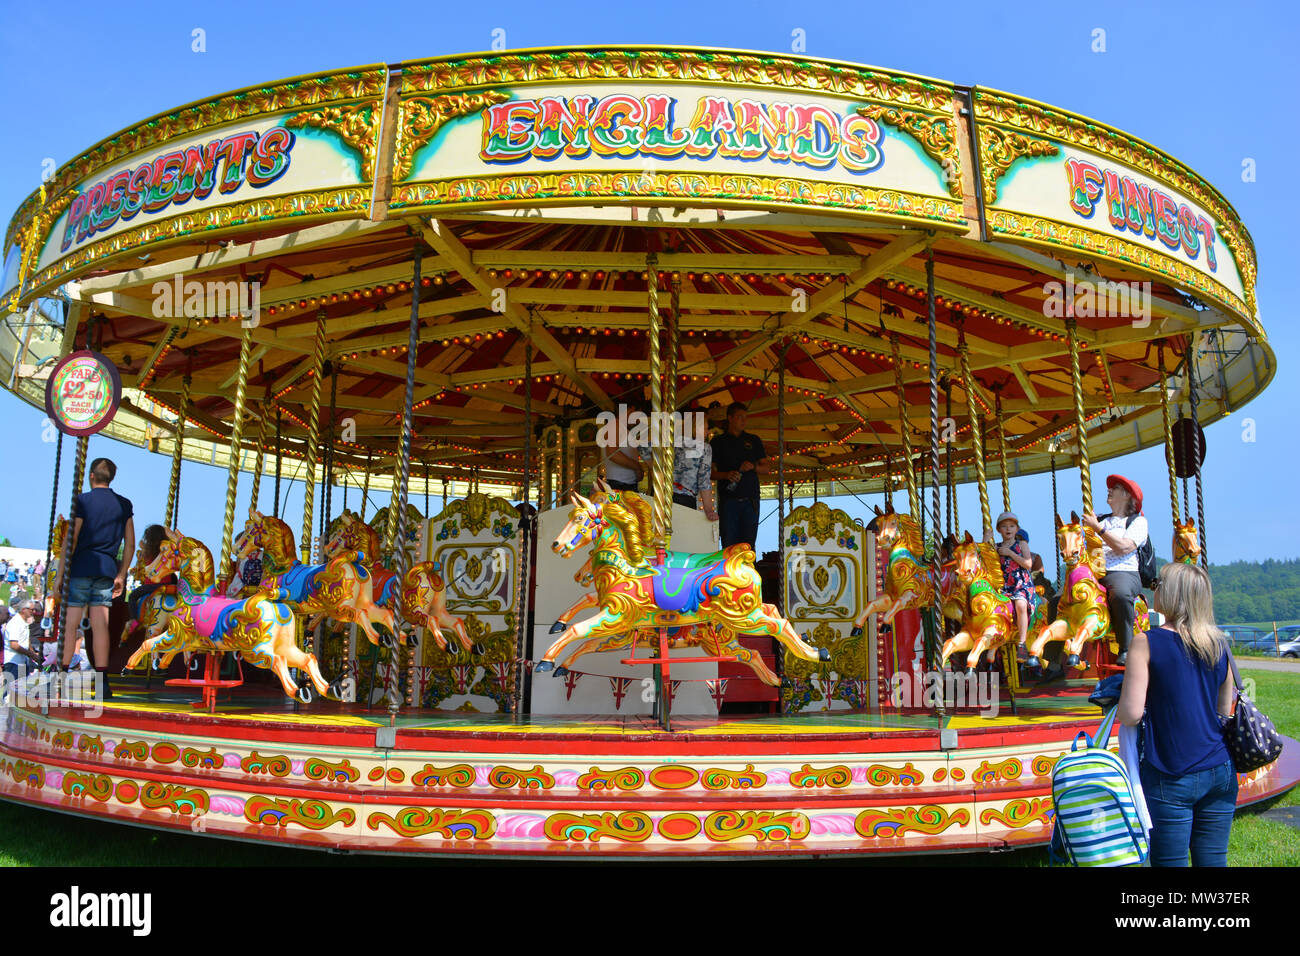 Merry-go-round at the annual Sherborne Castle Country Fair, Sherborne, Dorset, England. Stock Photo